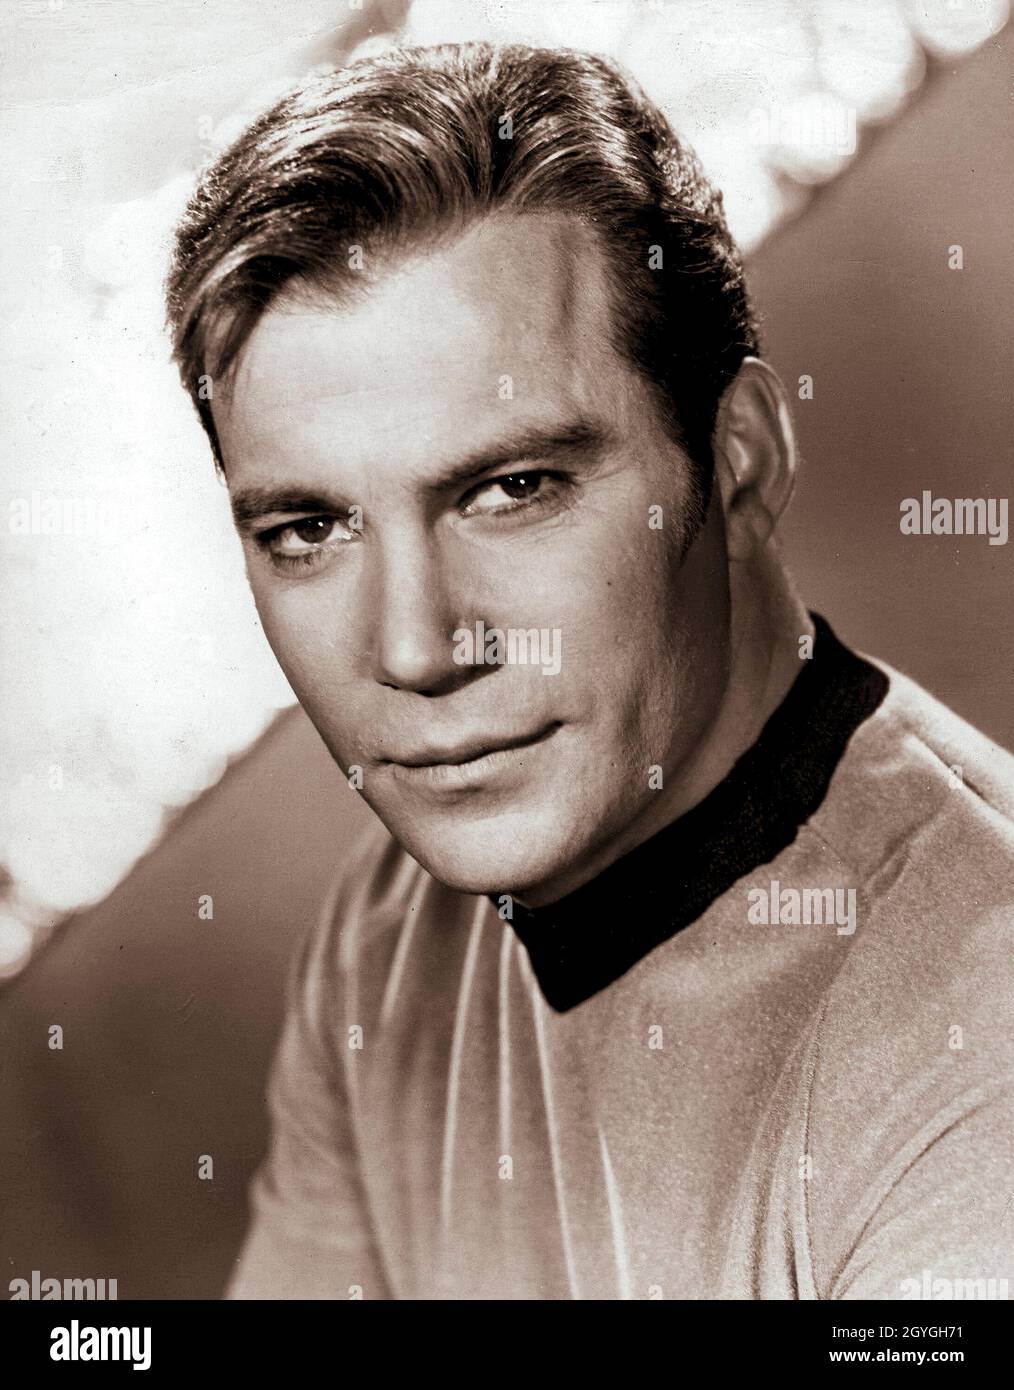 William Shatner as Star Trek's Captain Kirk. William Shatner OC (born March 22, 1931) is a Canadian actor, author, producer, director, screenwriter, and singer. In his seven decades of acting, he became a cultural icon for his portrayal of Captain James T. Kirk of the USS Enterprise in the Star Trek franchise. He has written a series of books chronicling his experiences playing Captain Kirk, being a part of Star Trek, and life after Star Trek. Stock Photo